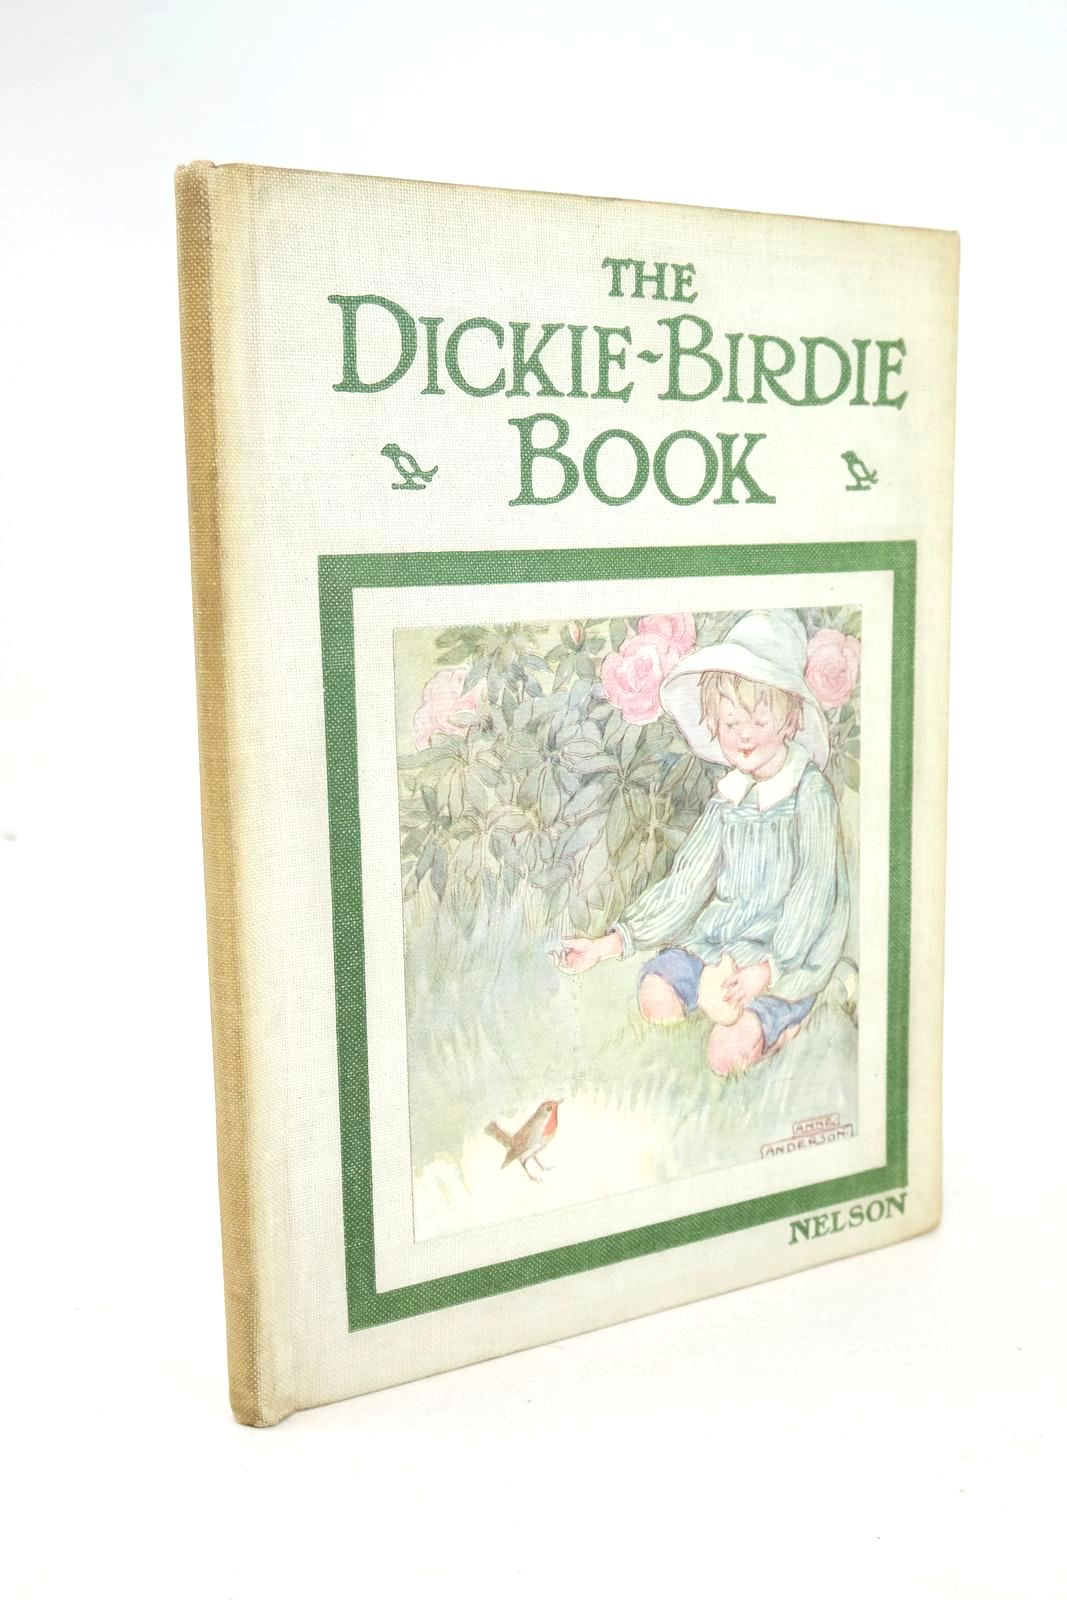 Photo of THE DICKIE-BIRDIE BOOK illustrated by Anderson, Anne published by Thomas Nelson and Sons Ltd. (STOCK CODE: 1325538)  for sale by Stella & Rose's Books